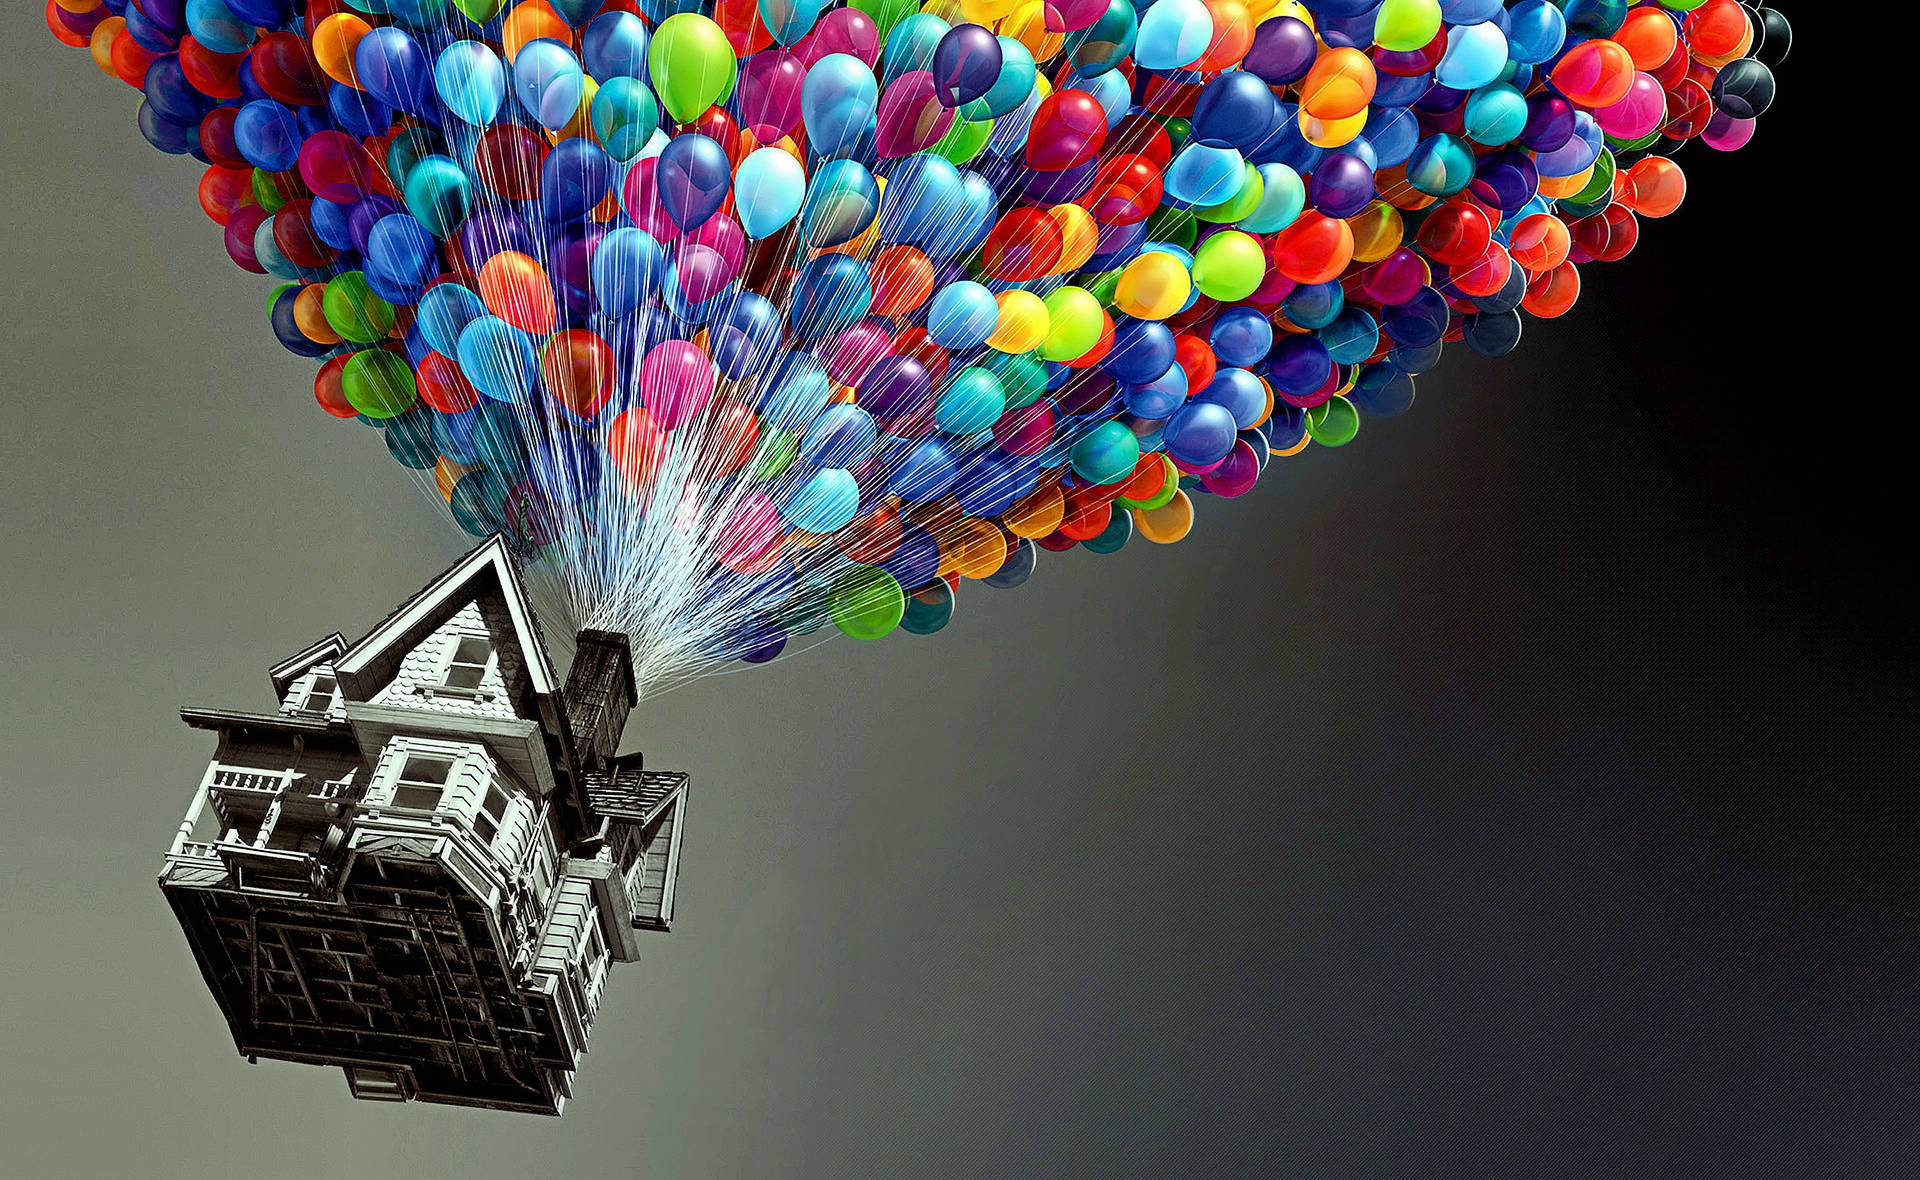 Up Movie Colorful Balloons Background